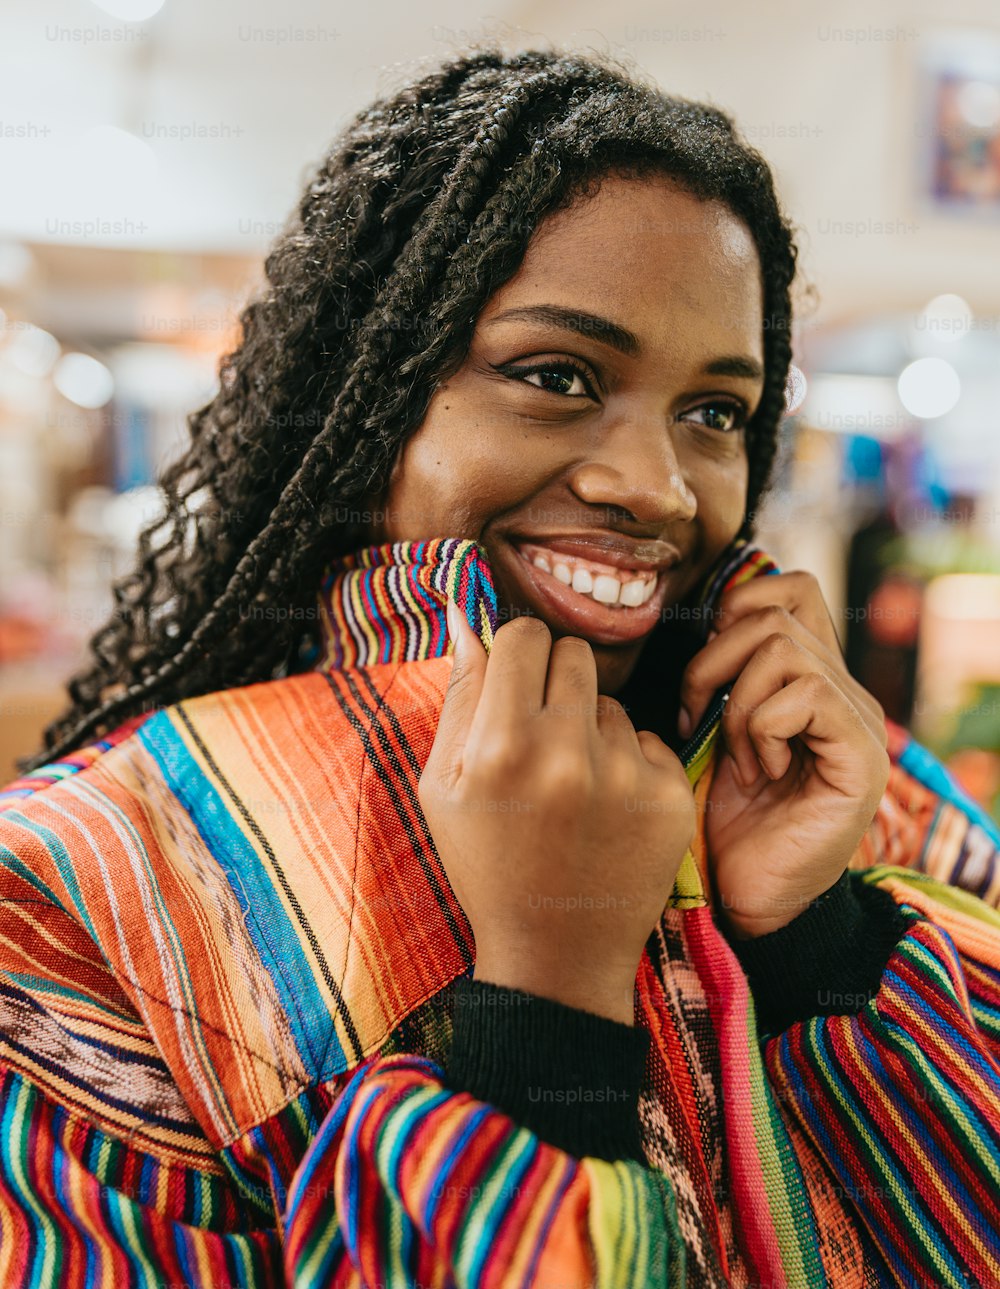 a woman smiles while holding a colorful jacket